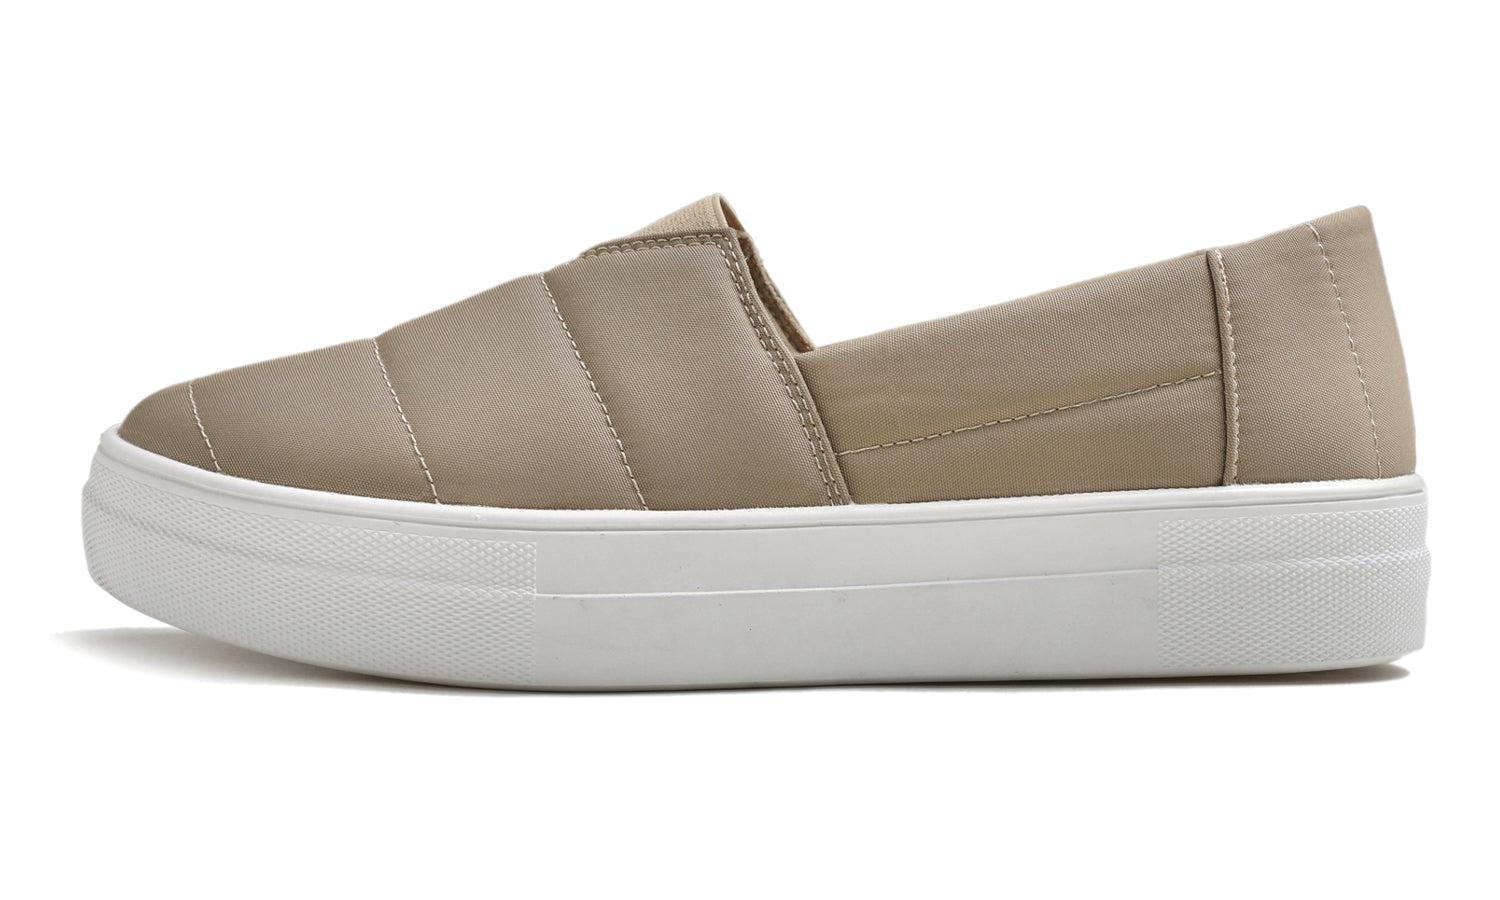 Feversole Women's Casual Slip On Sneaker Comfort Cupsole Loafer Flats Taupe Puffy Textile